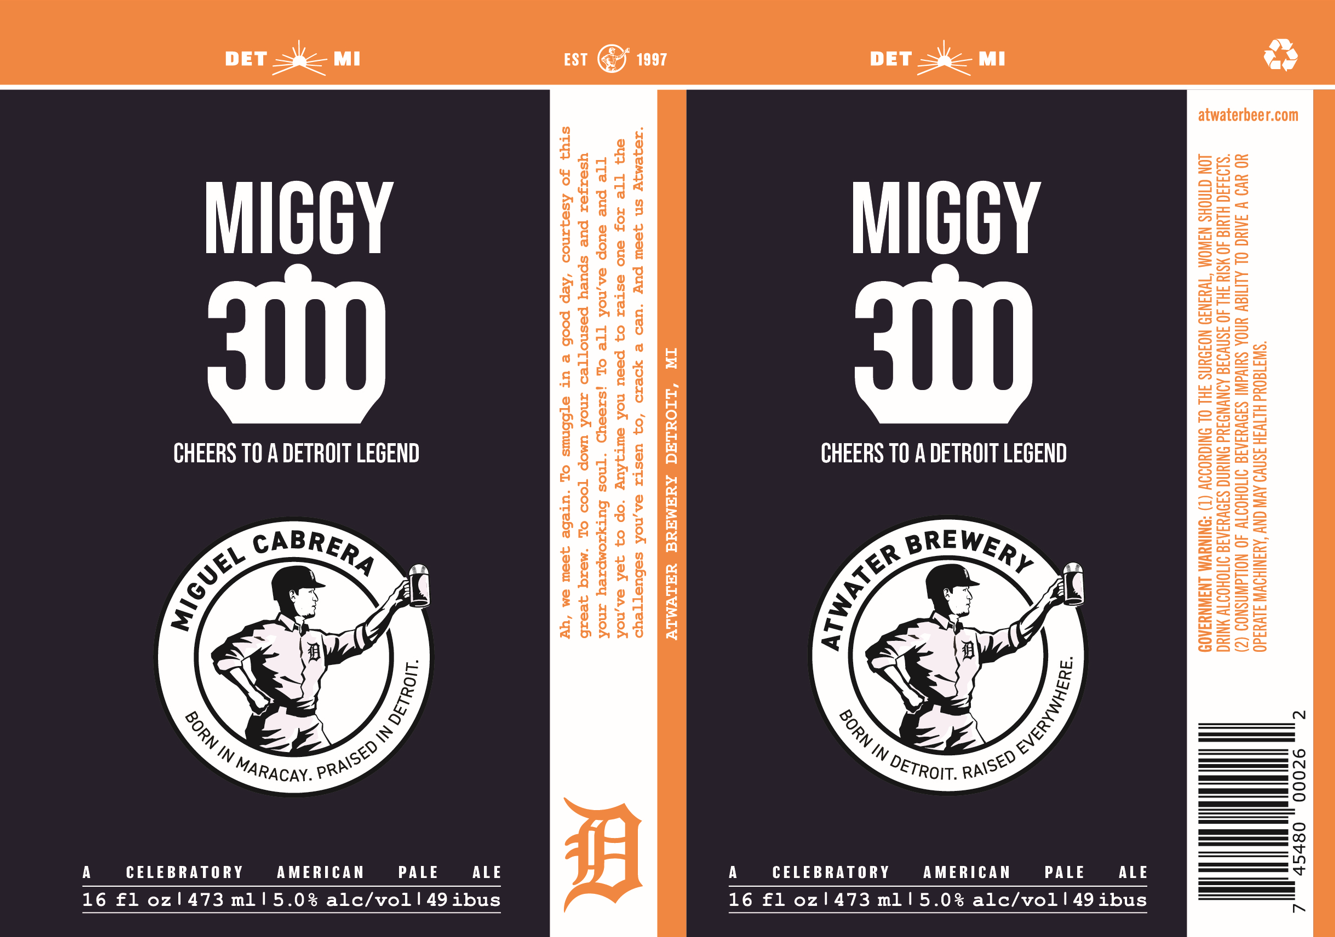 Atwater Brewery's new Beer label for Miggy, a Celebratory American Pale Ale